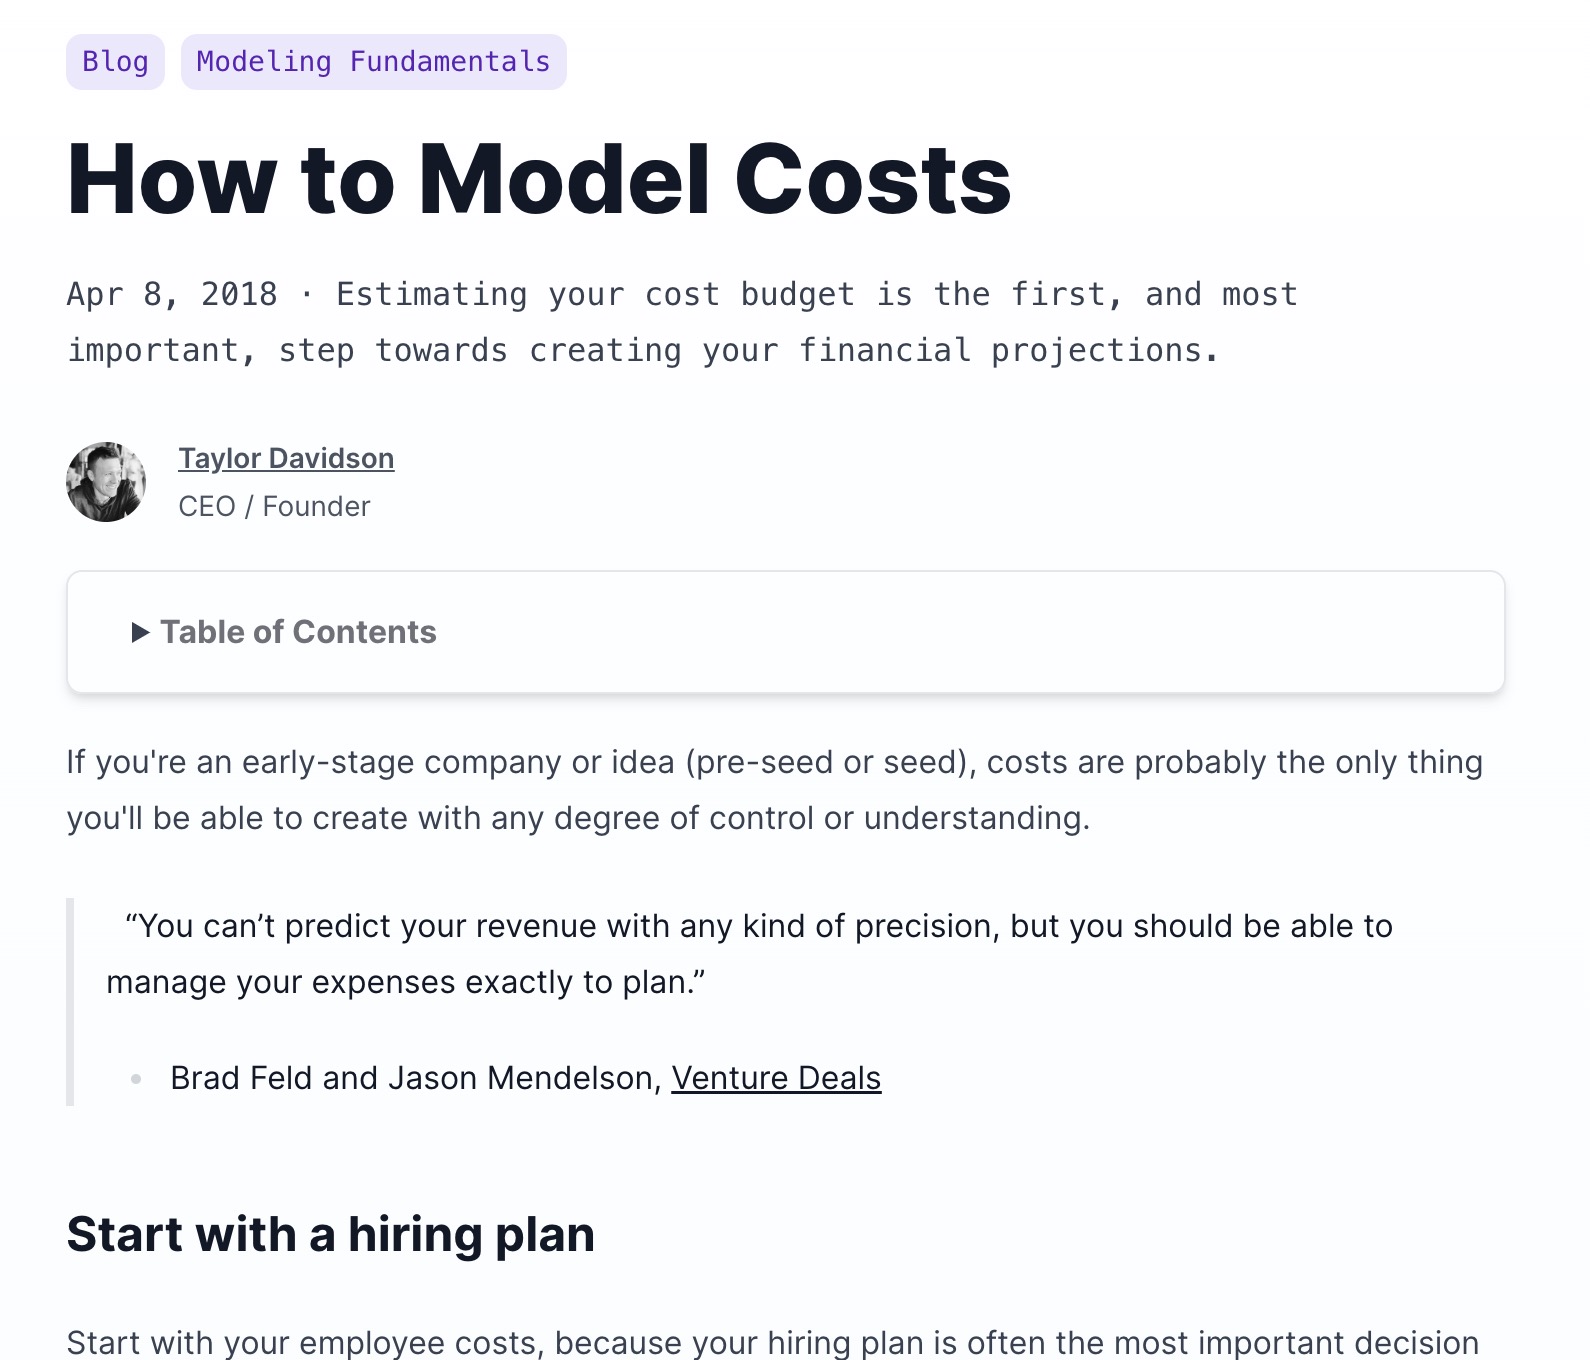 How to Model Costs